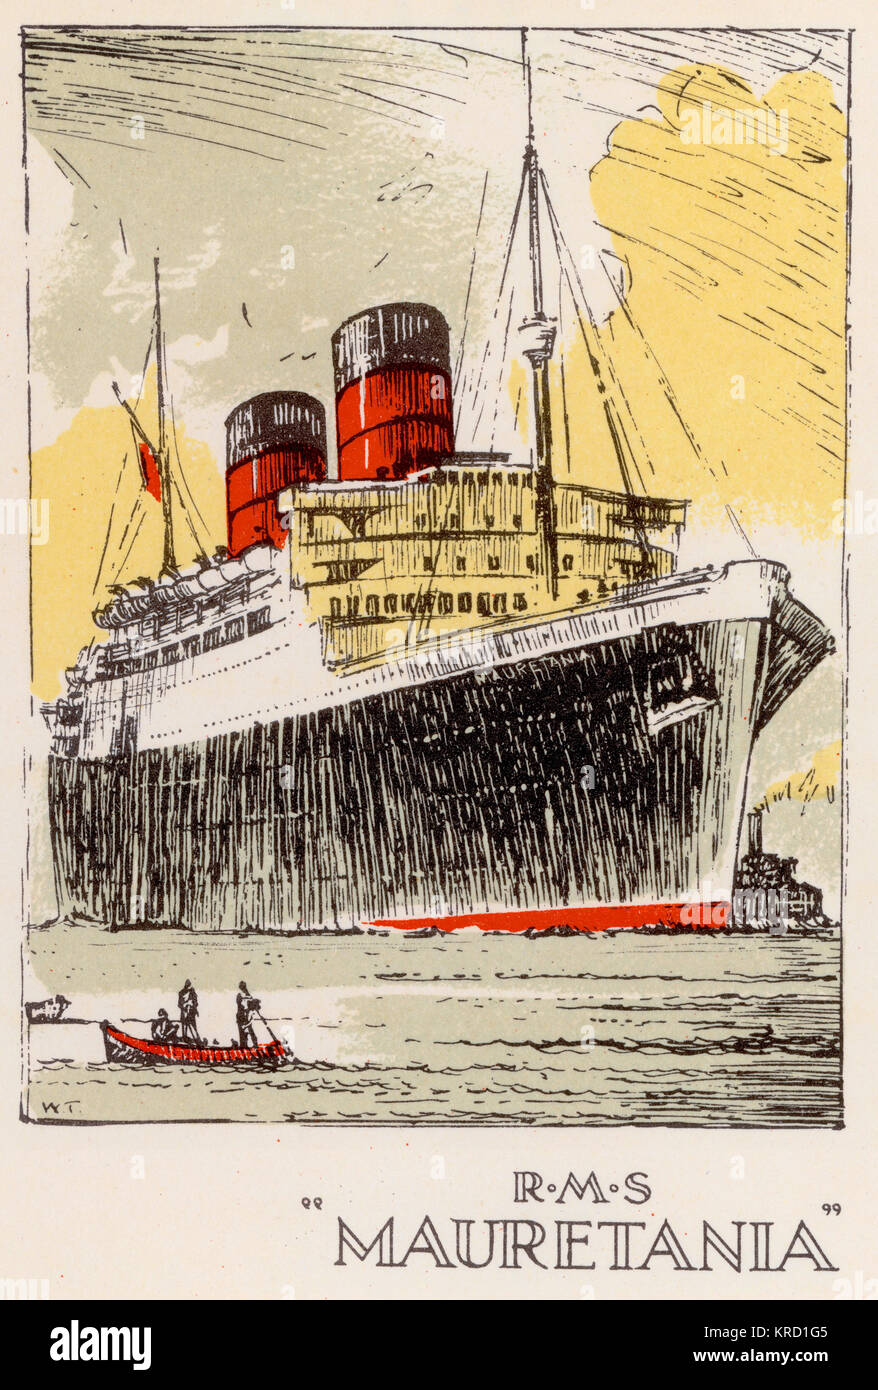 RMS Mauretania. A successor to RMS Mauretania of 1906. Launched 28th July, 1938 she saw only the briefest period of commercial operation before being requisitioned by the British Government for use as a troop ship during World War II. In 1947 she rejoined commercial service and sailed the transatlantic route during the summer months and the Caribbean during the winter. She was finally withdrawn from service and sold for scrap in 1965.     Date: Launched 1938 Stock Photo